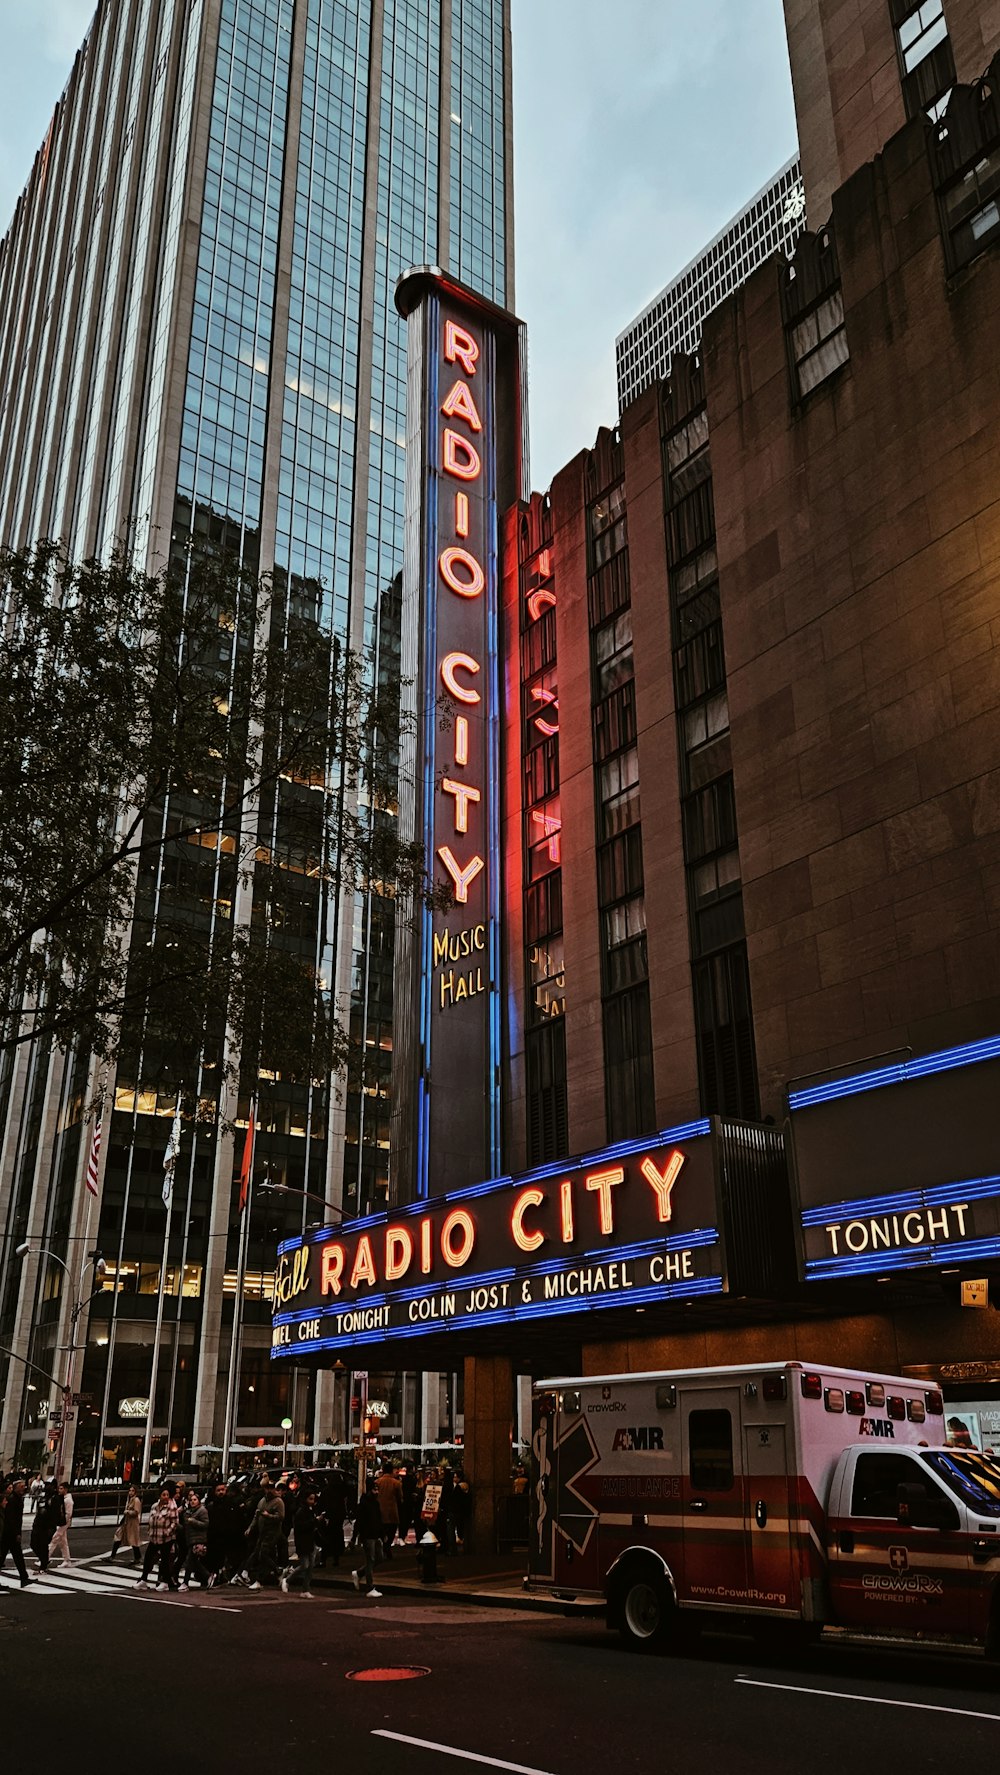 a radio city building with a radio city sign